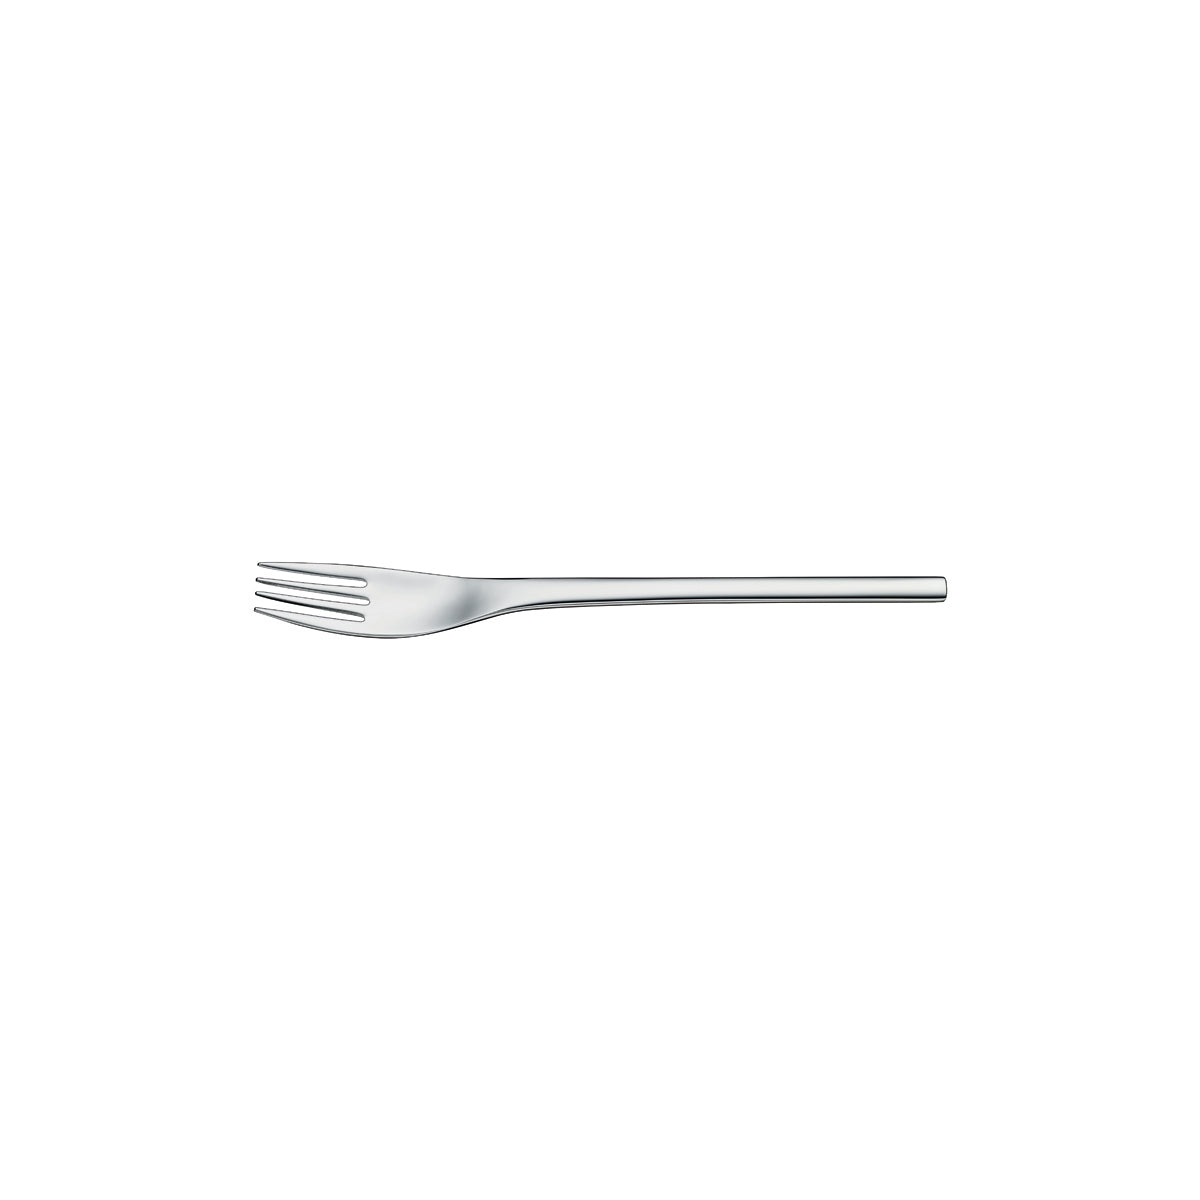 54.7202.6040 WMF Nordic Table Fork Stainless Steel Tomkin Australia Hospitality Supplies